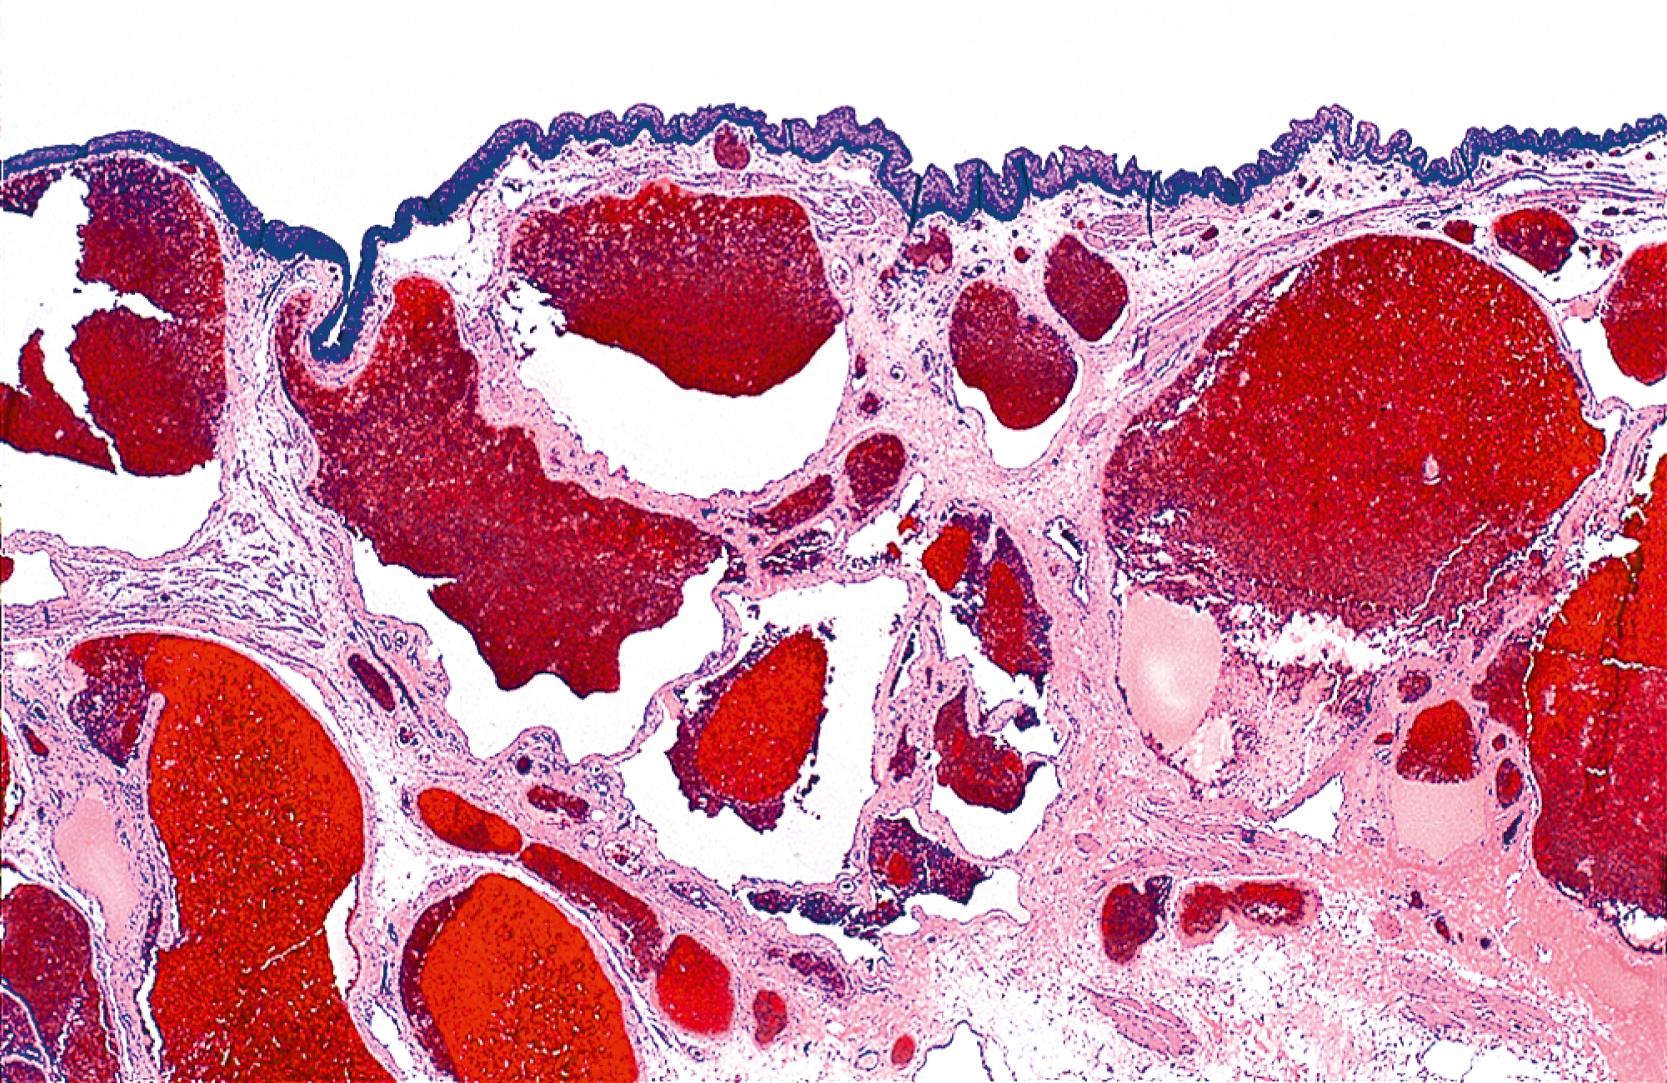 FIGURE 32.3, Low-power view of a hemorrhoid showing vascular dilation and thrombosis. Chronic inflammation of the intervening stroma is also present.